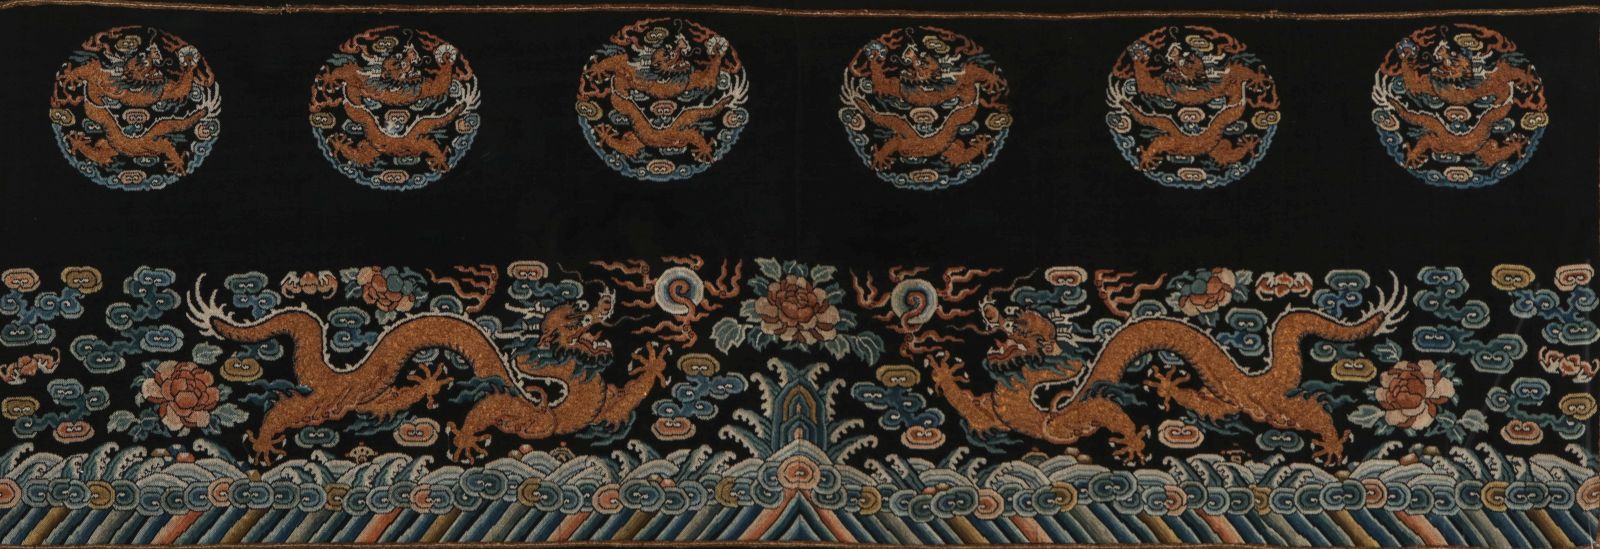 A CHINESE GOLD THREAD EMBROIDERED PANEL 